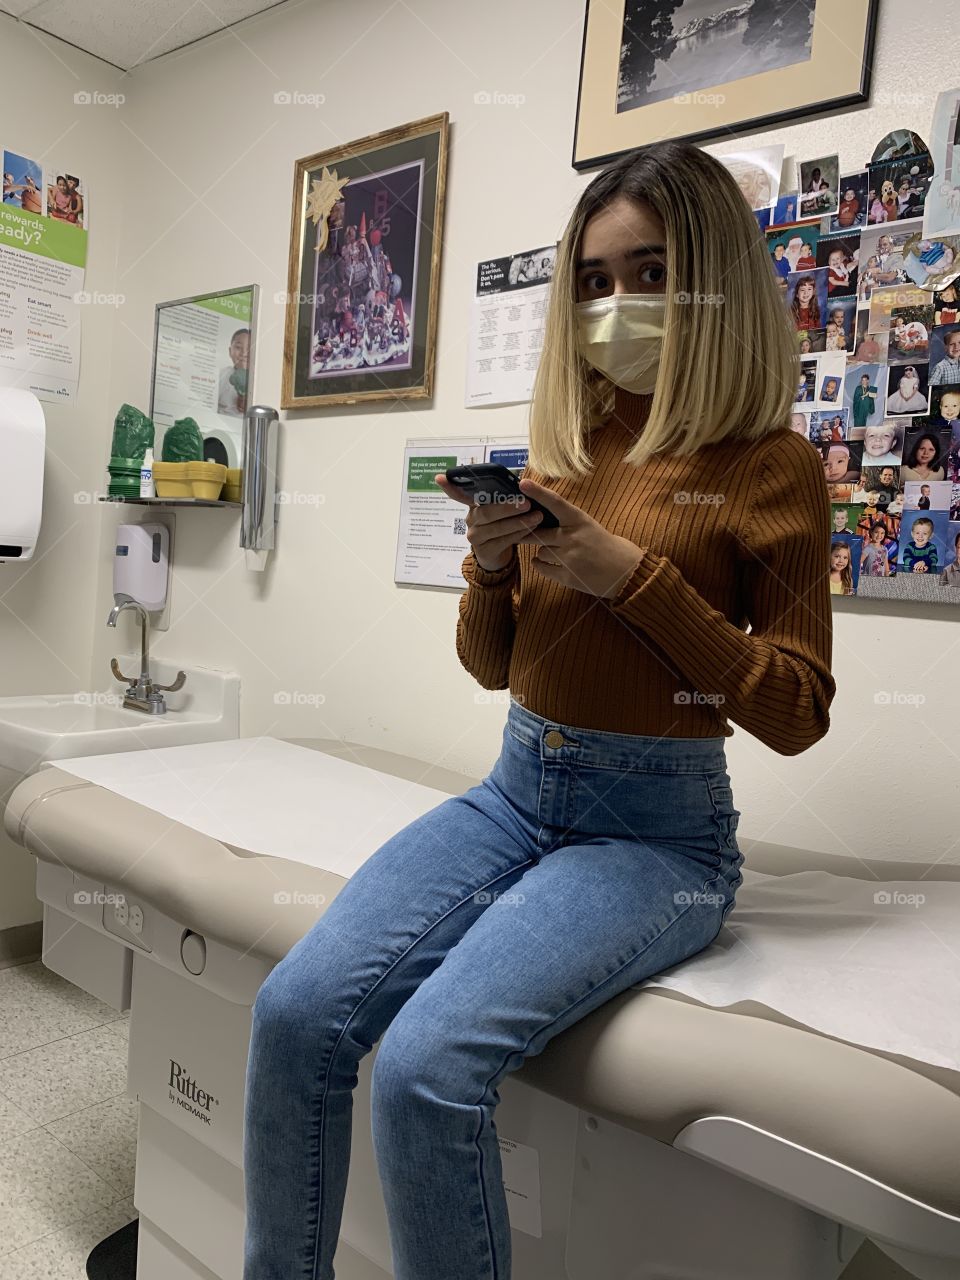 My 11 year old daughter at the doctor’s office with a bad cold and asthma. She’s doing a lot better now. 